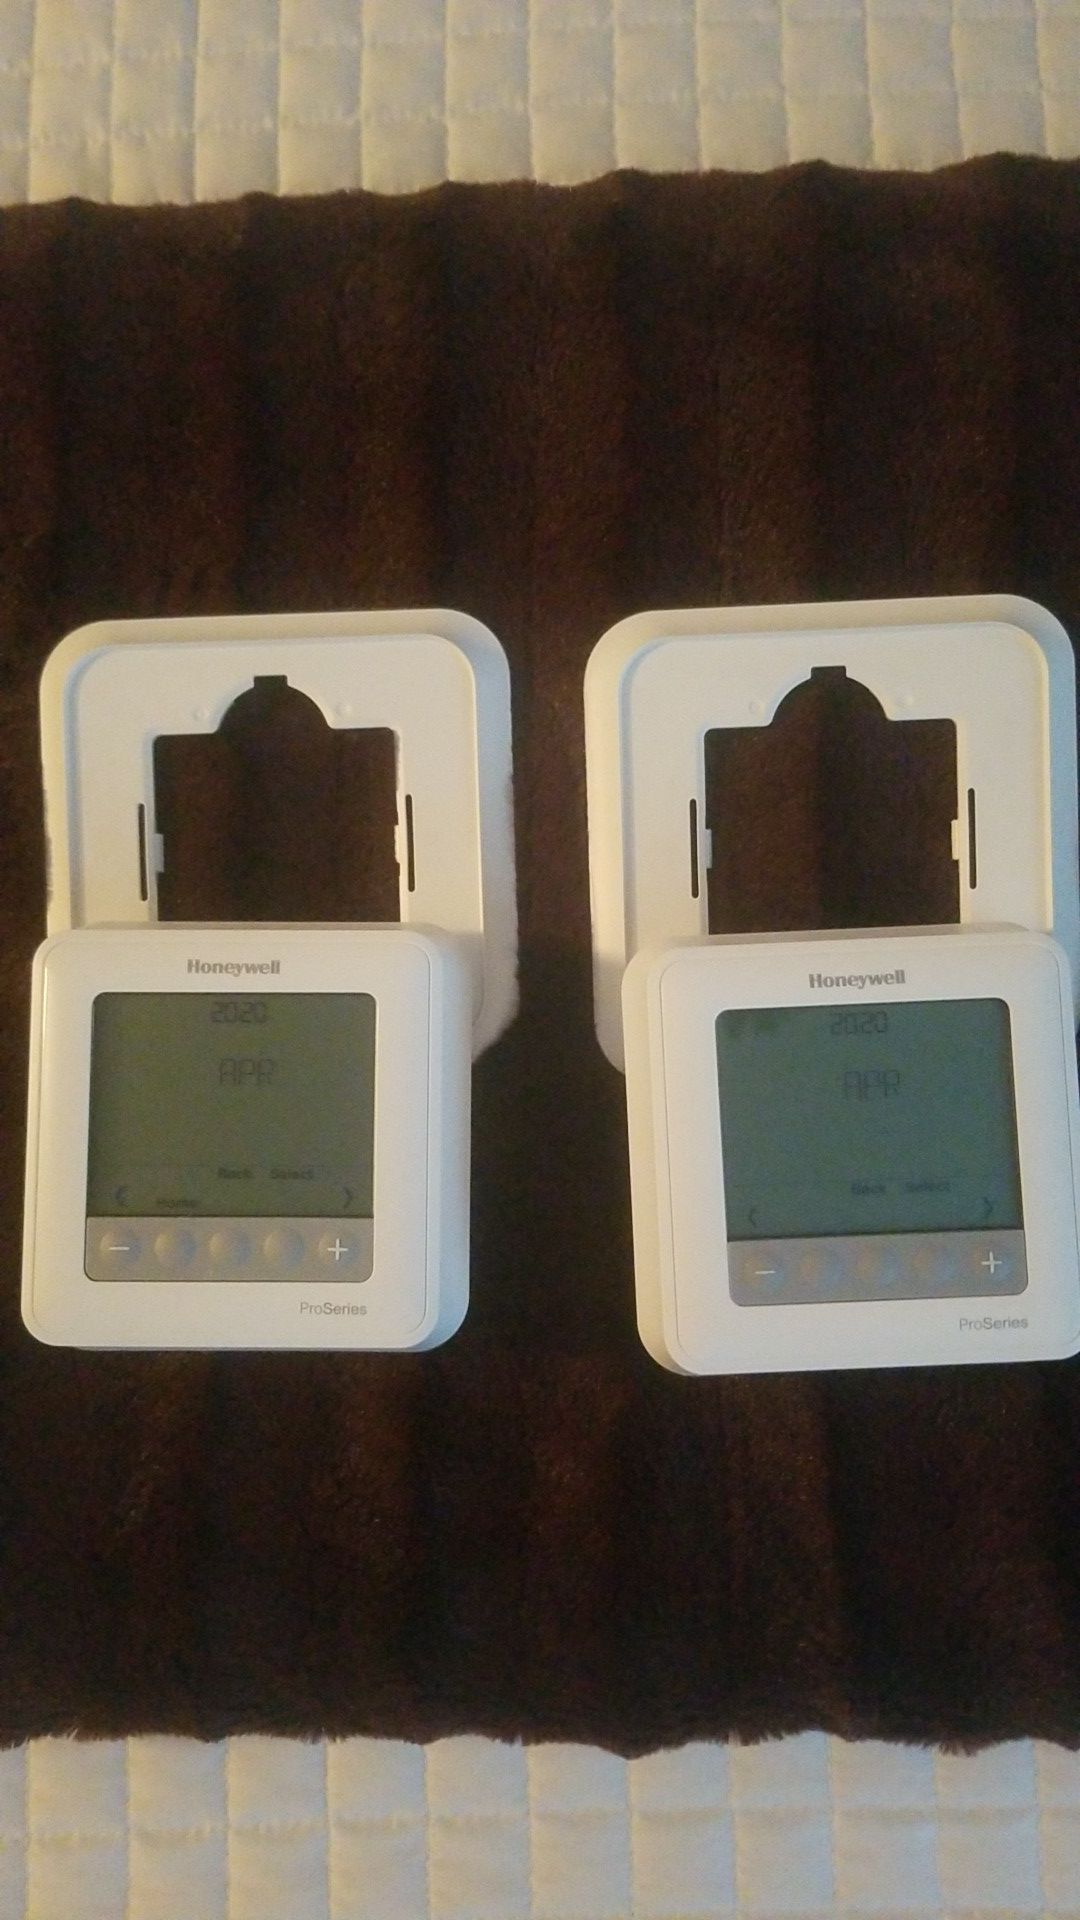 Two Honeywell Programmable Thermostats